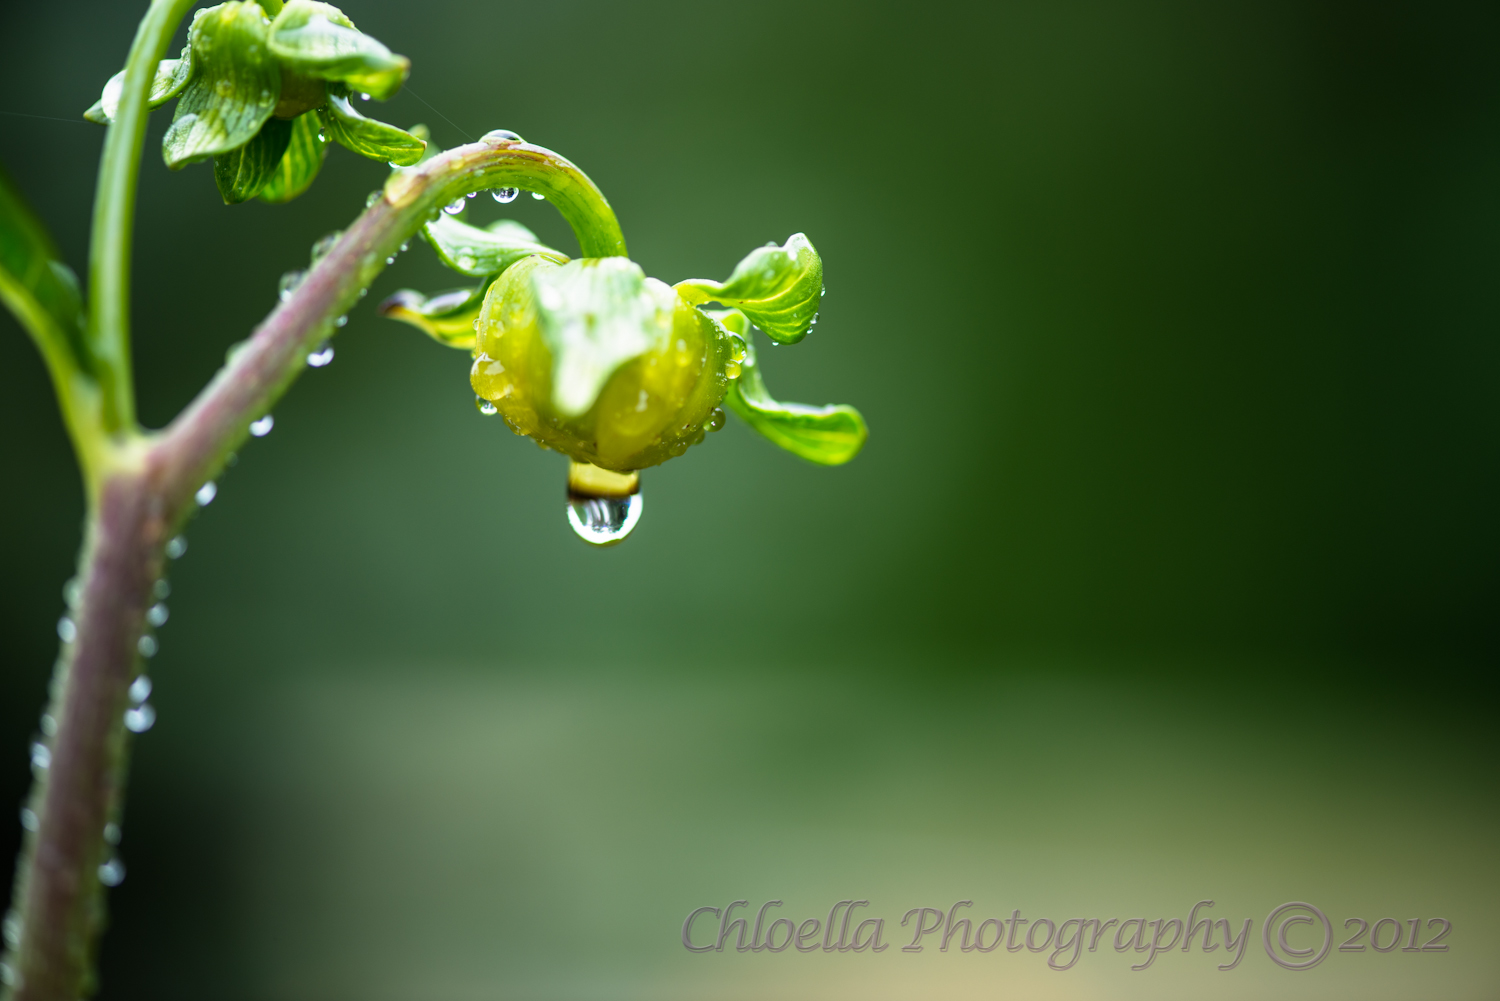 Reflections of a Water Droplet